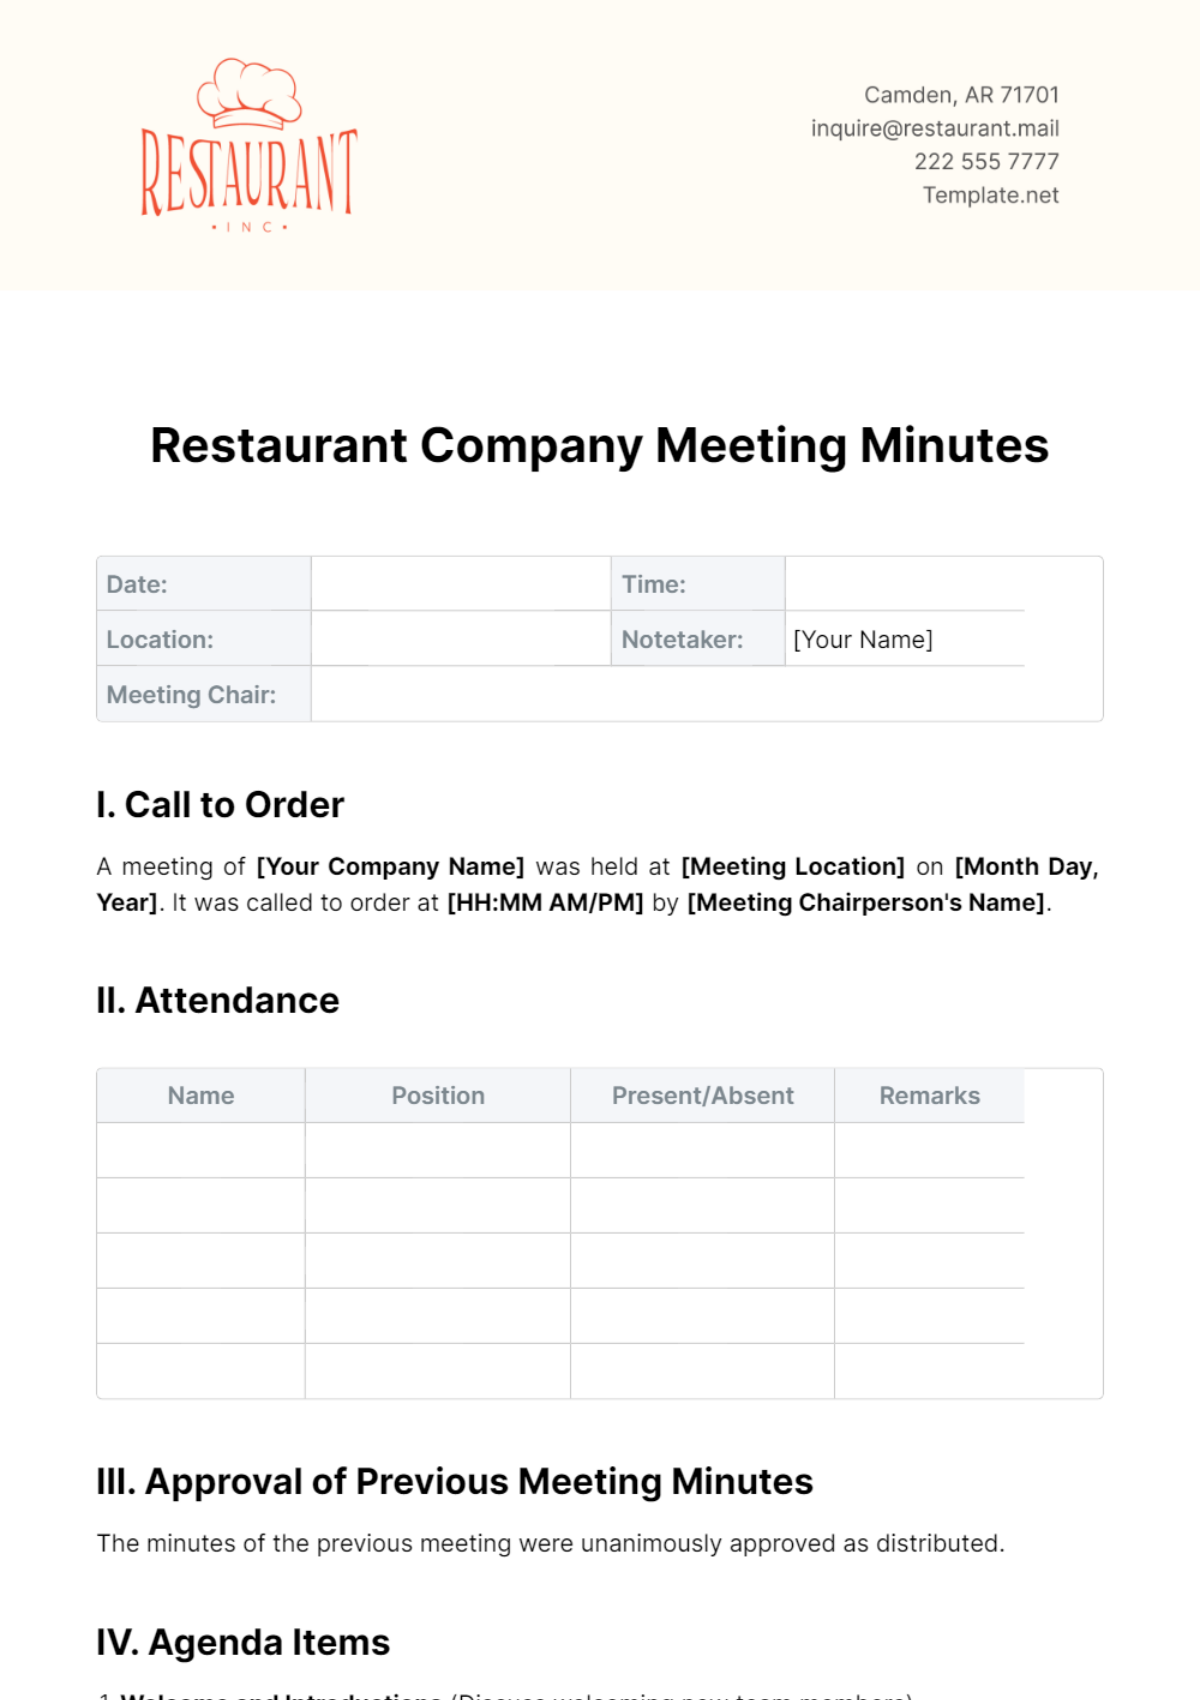 Free Restaurant Company Meeting Minutes Template